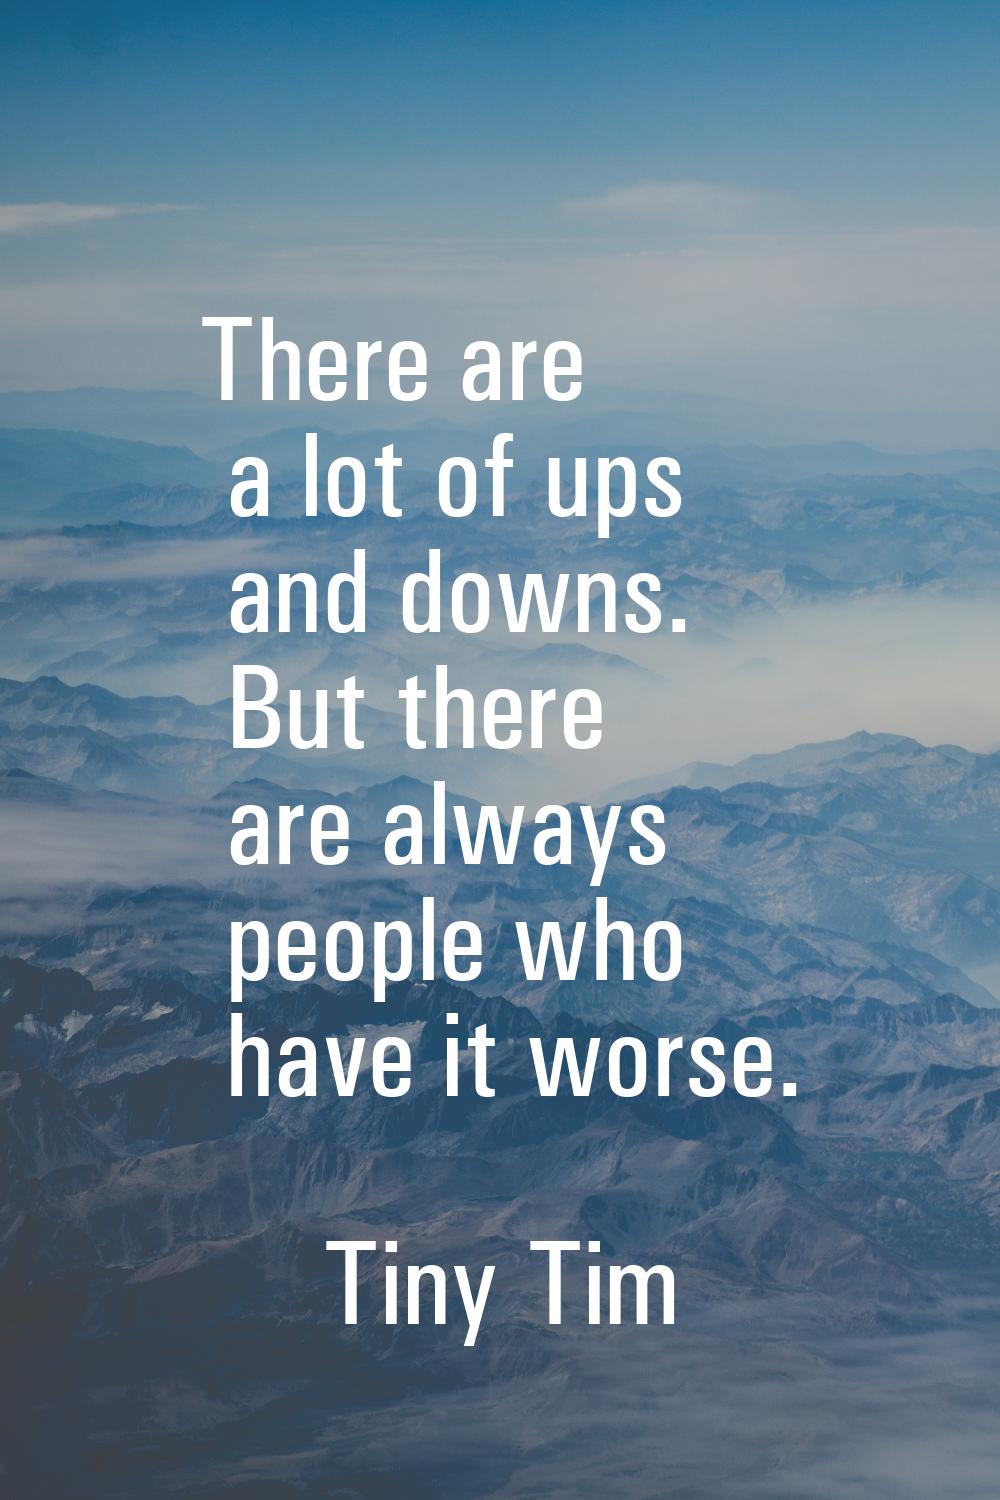 There are a lot of ups and downs. But there are always people who have it worse.